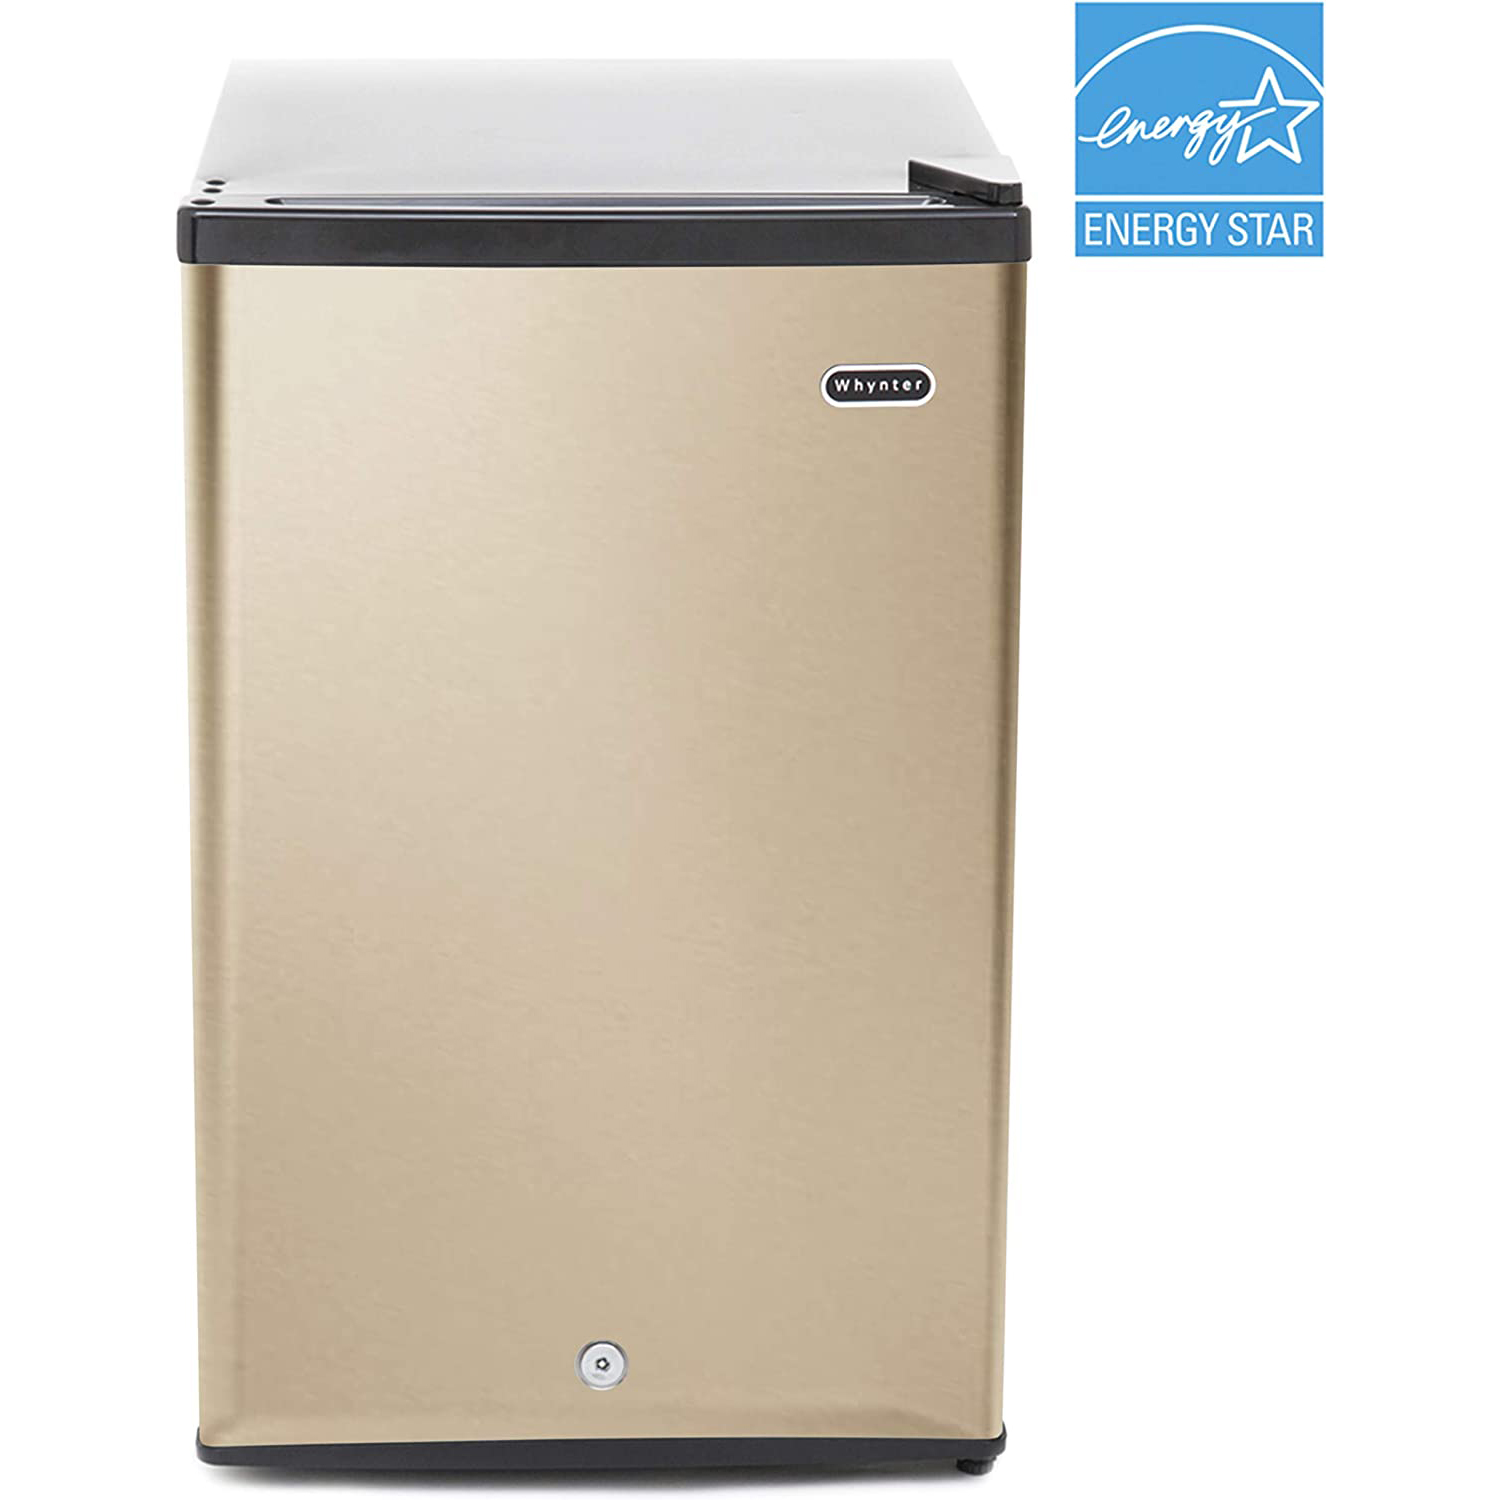 Photos - Wine Cooler Whynter 2.1 cu. ft. Energy Star Upright Freezer with Lock, Rose Gold (CUF